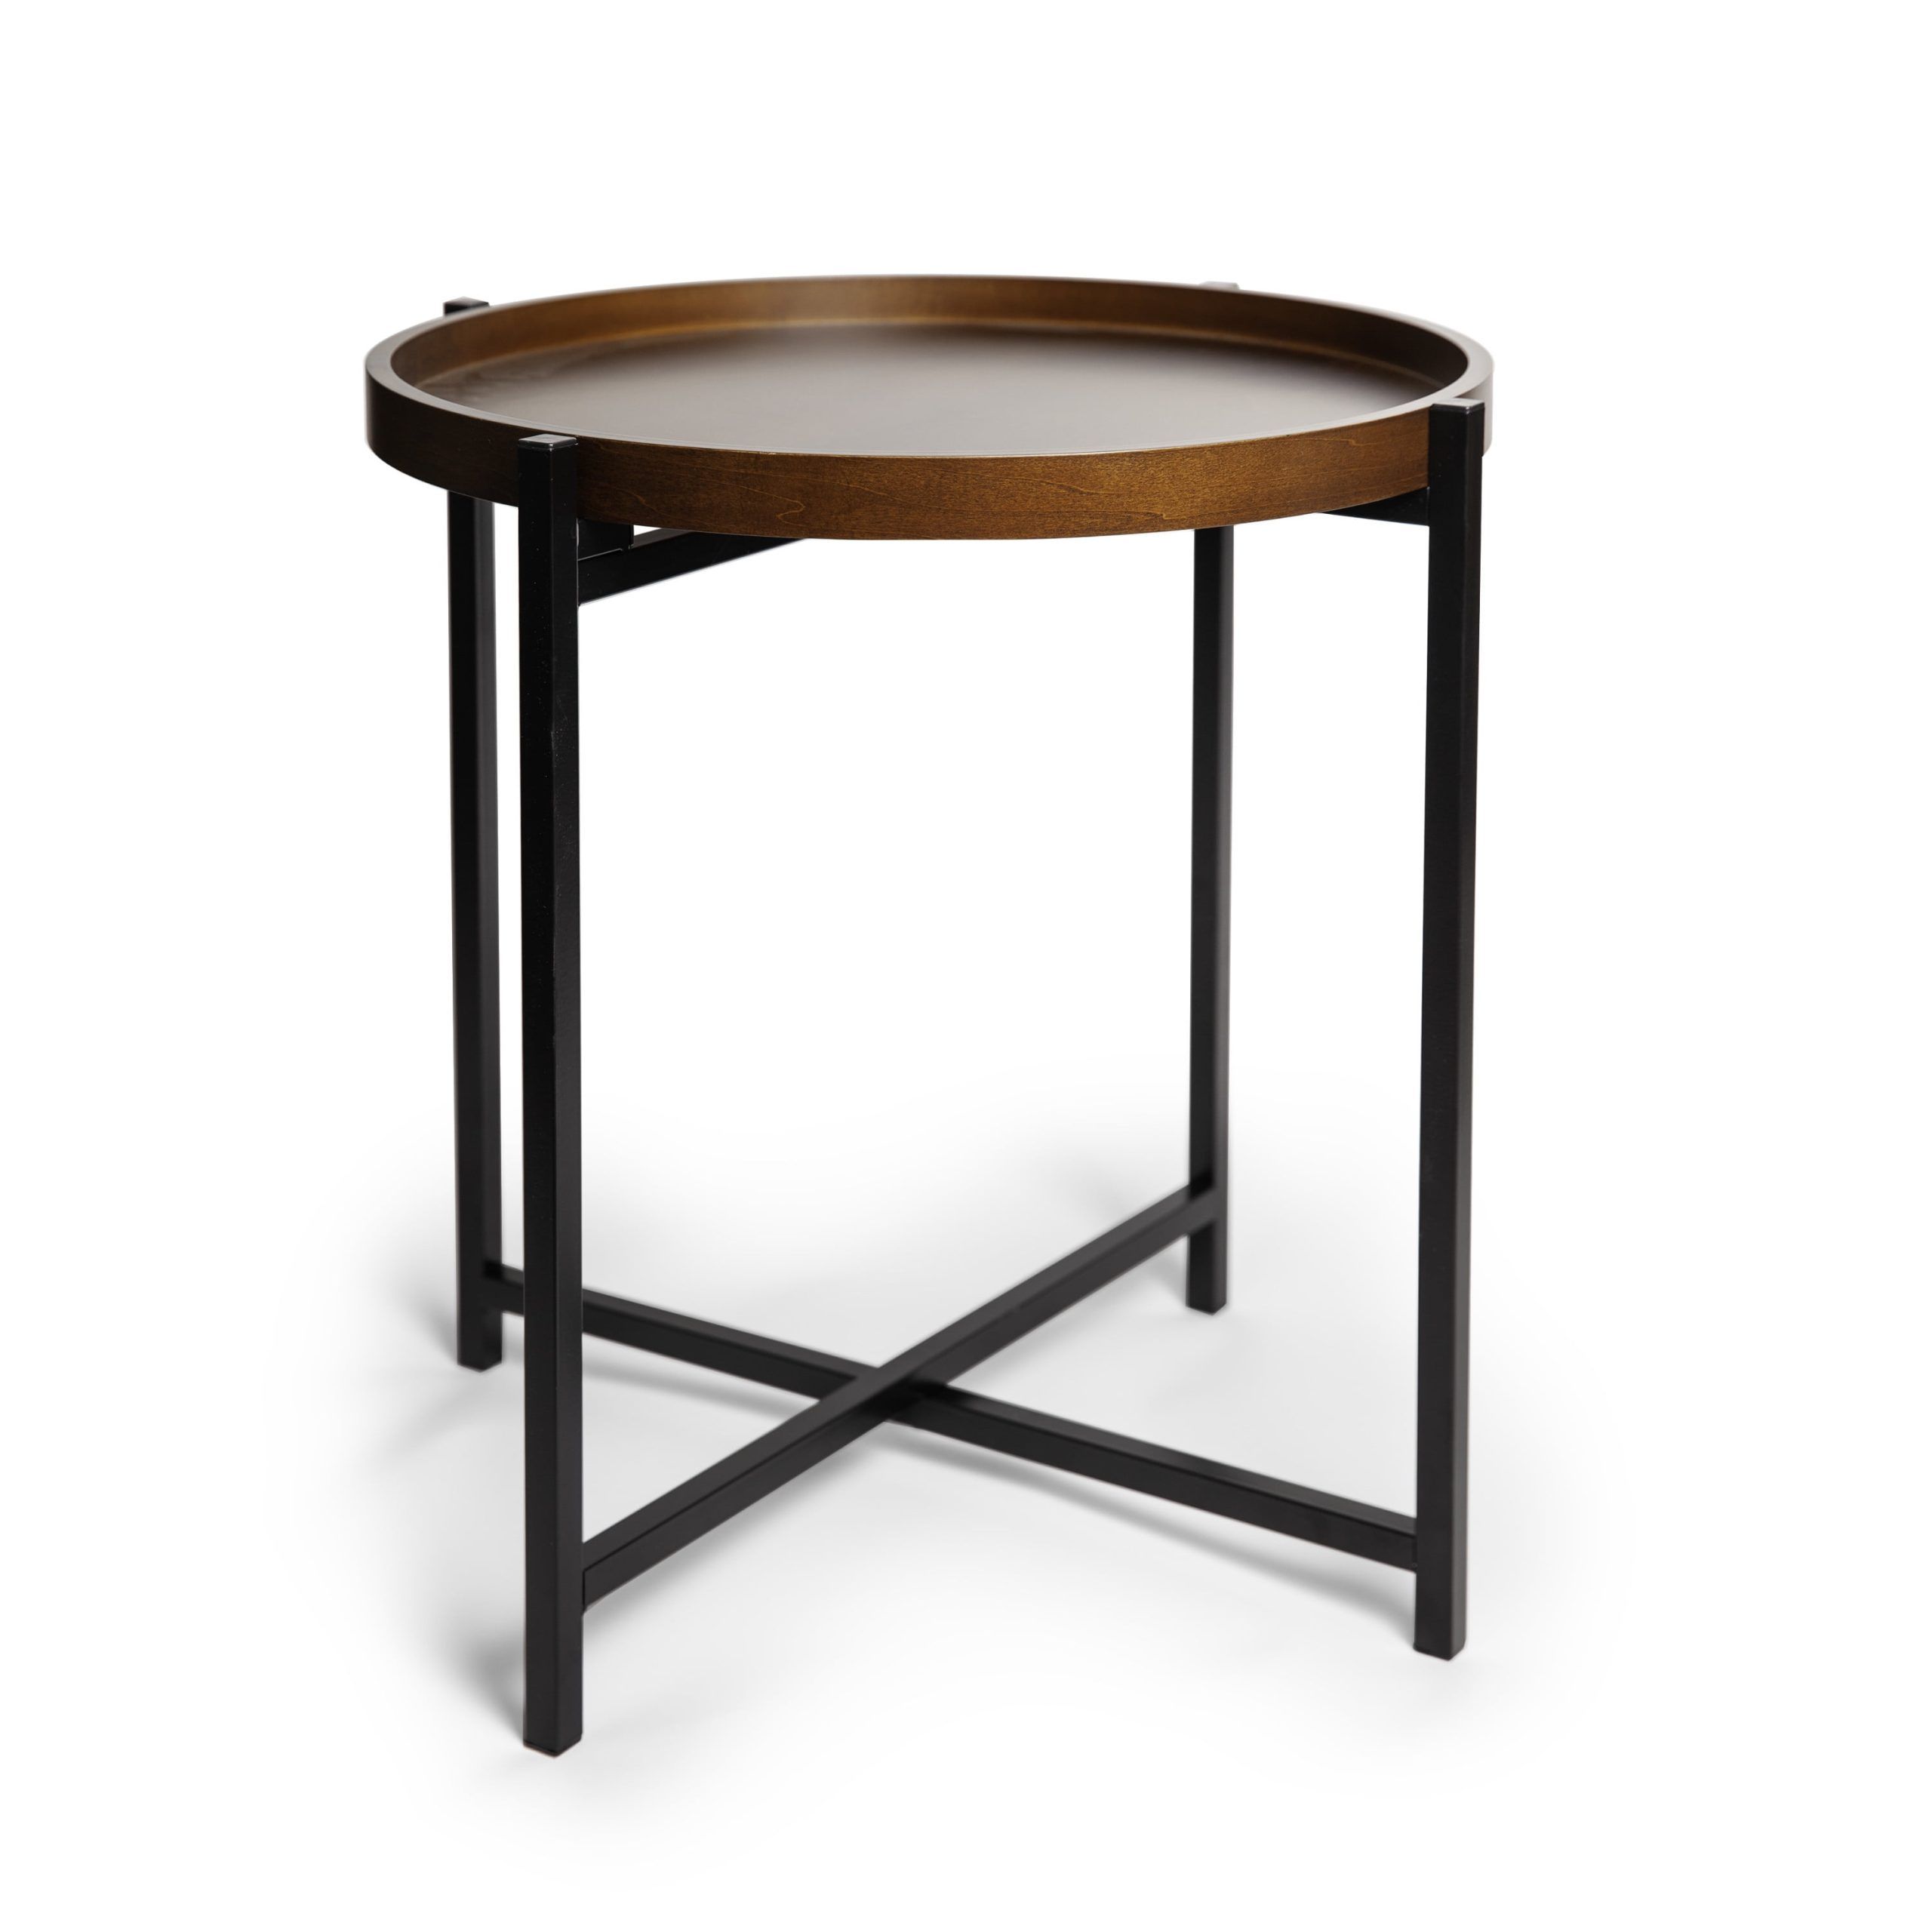 Widely Used Detachable Tray Coffee Tables Pertaining To Mid Century Modern Round Side Table With Removable Wood Tray – Walmart (View 11 of 15)